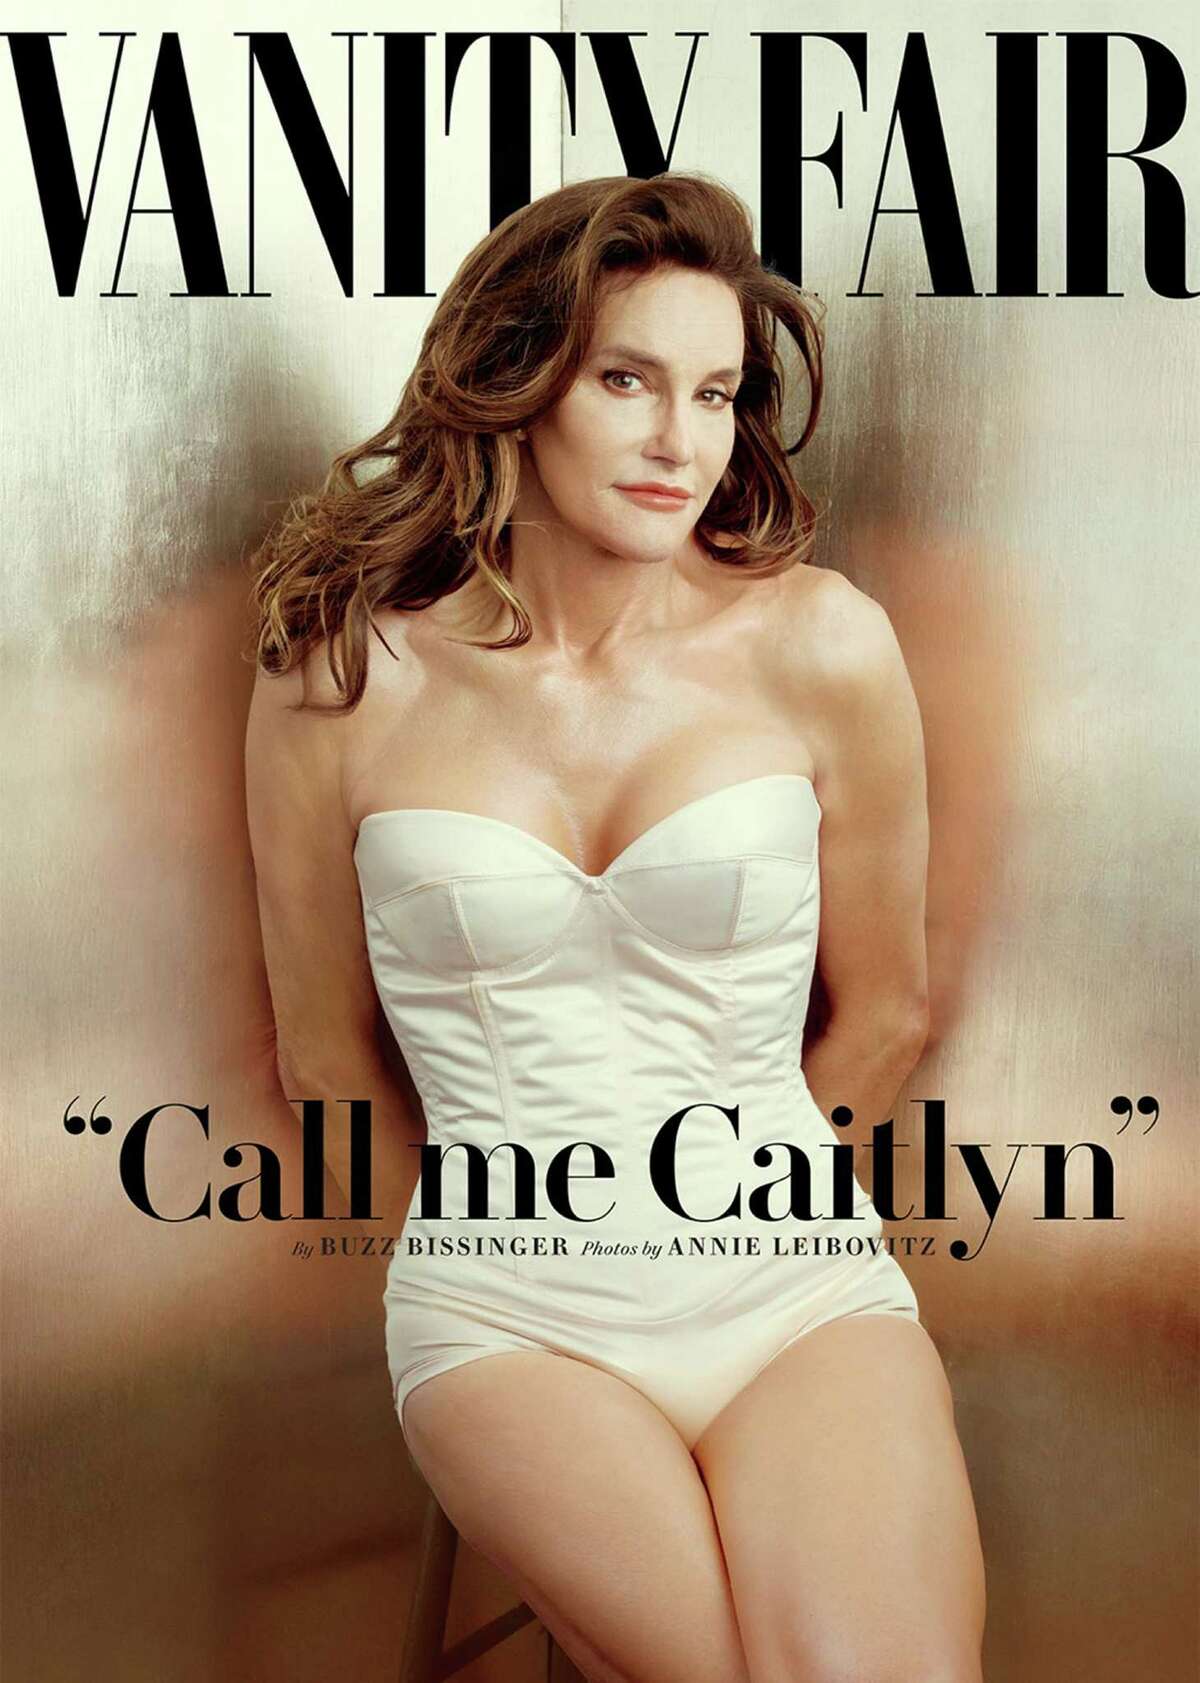 The July issue of Vanity Fair introduces the world to Caitlyn Jenner. Photo by Annie Leibovitz/ Vanity Fair.